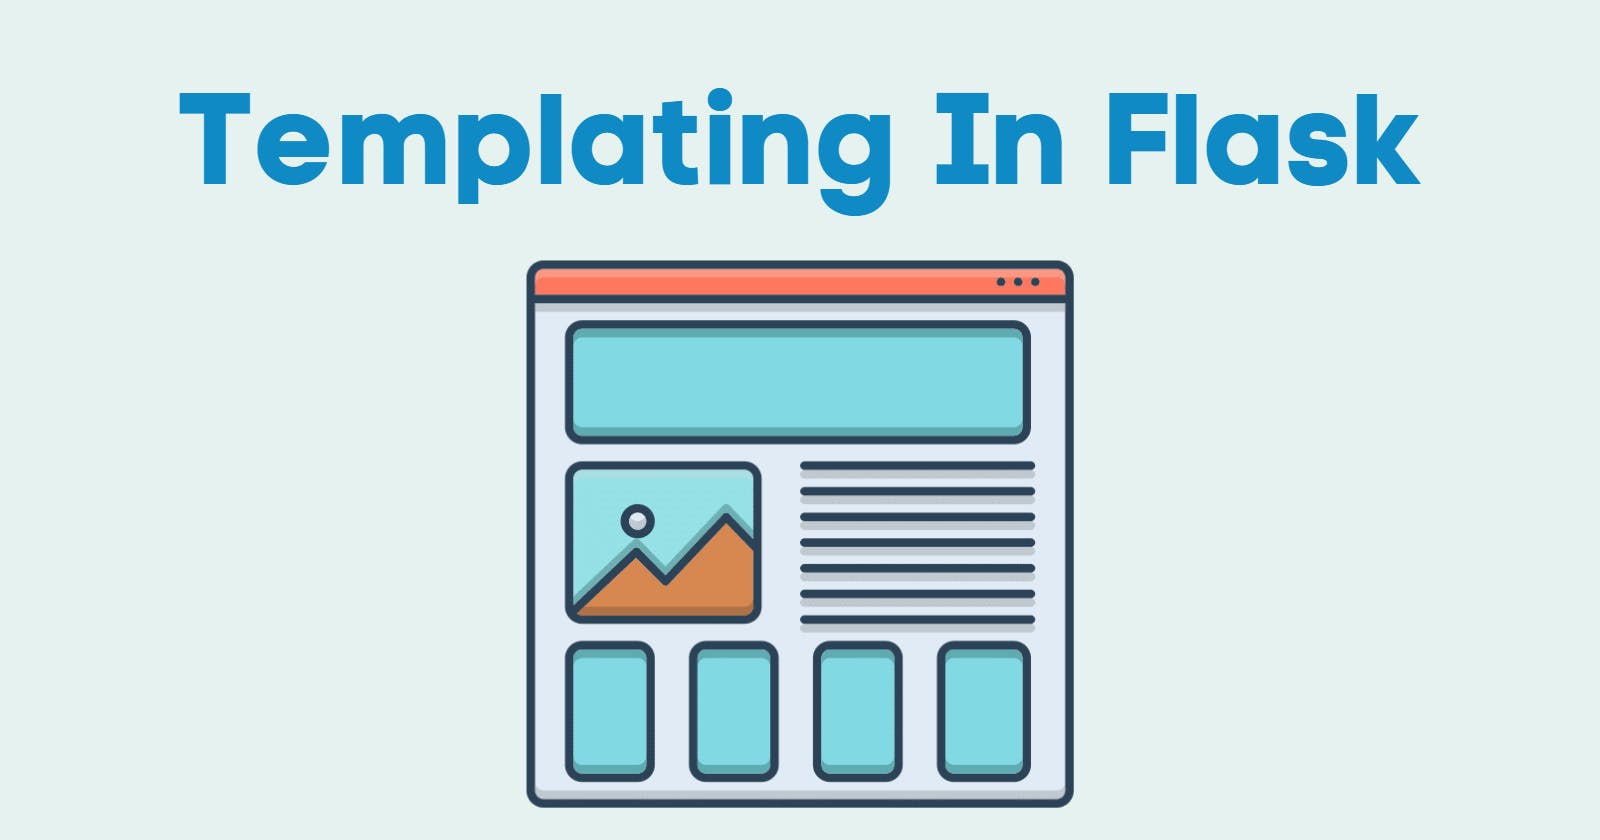 Templating in Flask